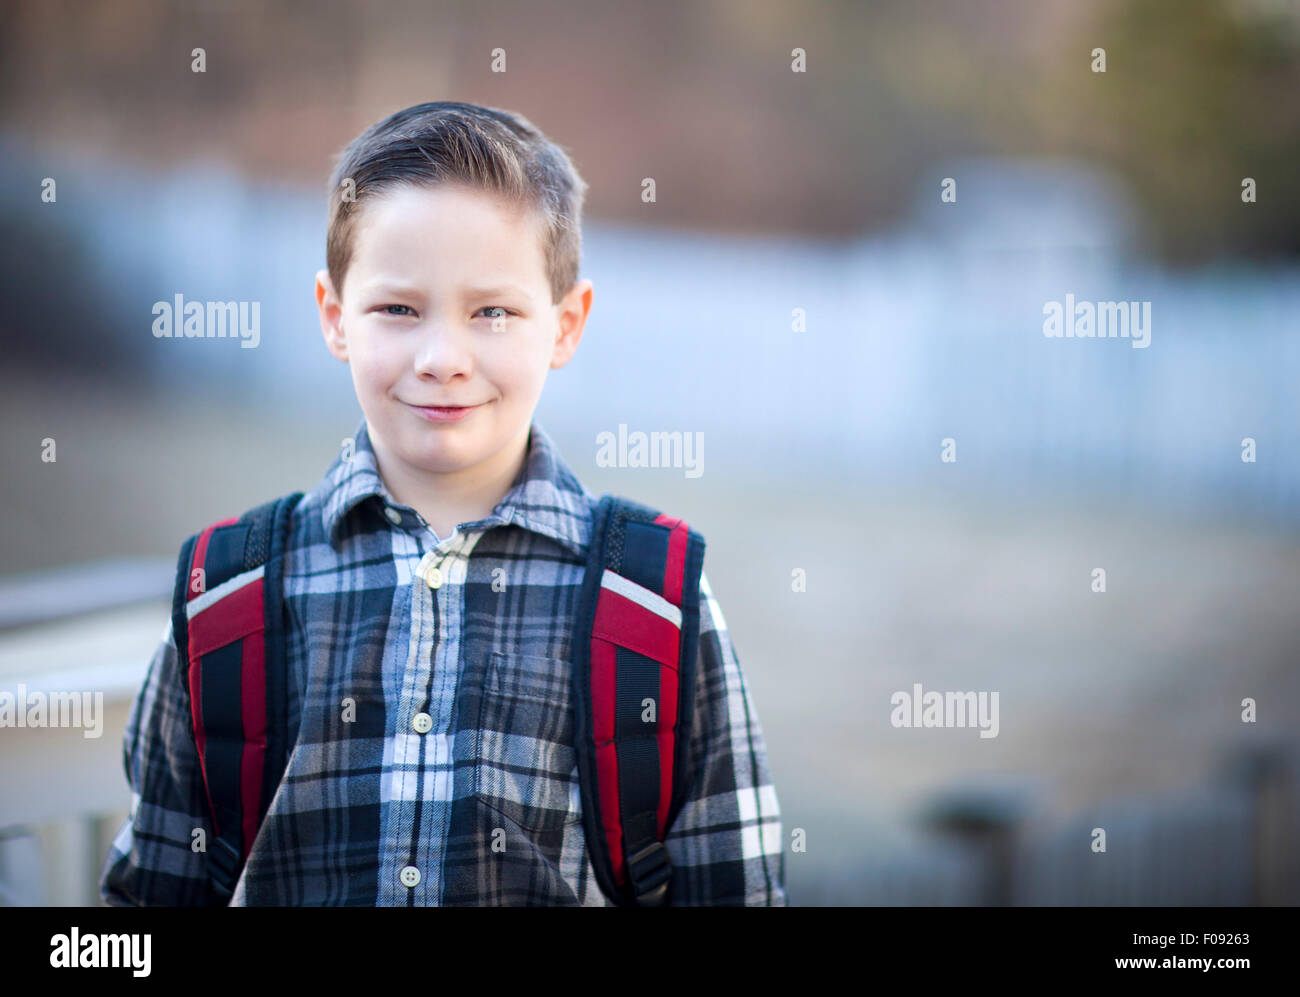 Handsome young boy with a backpack outside Stock Photo